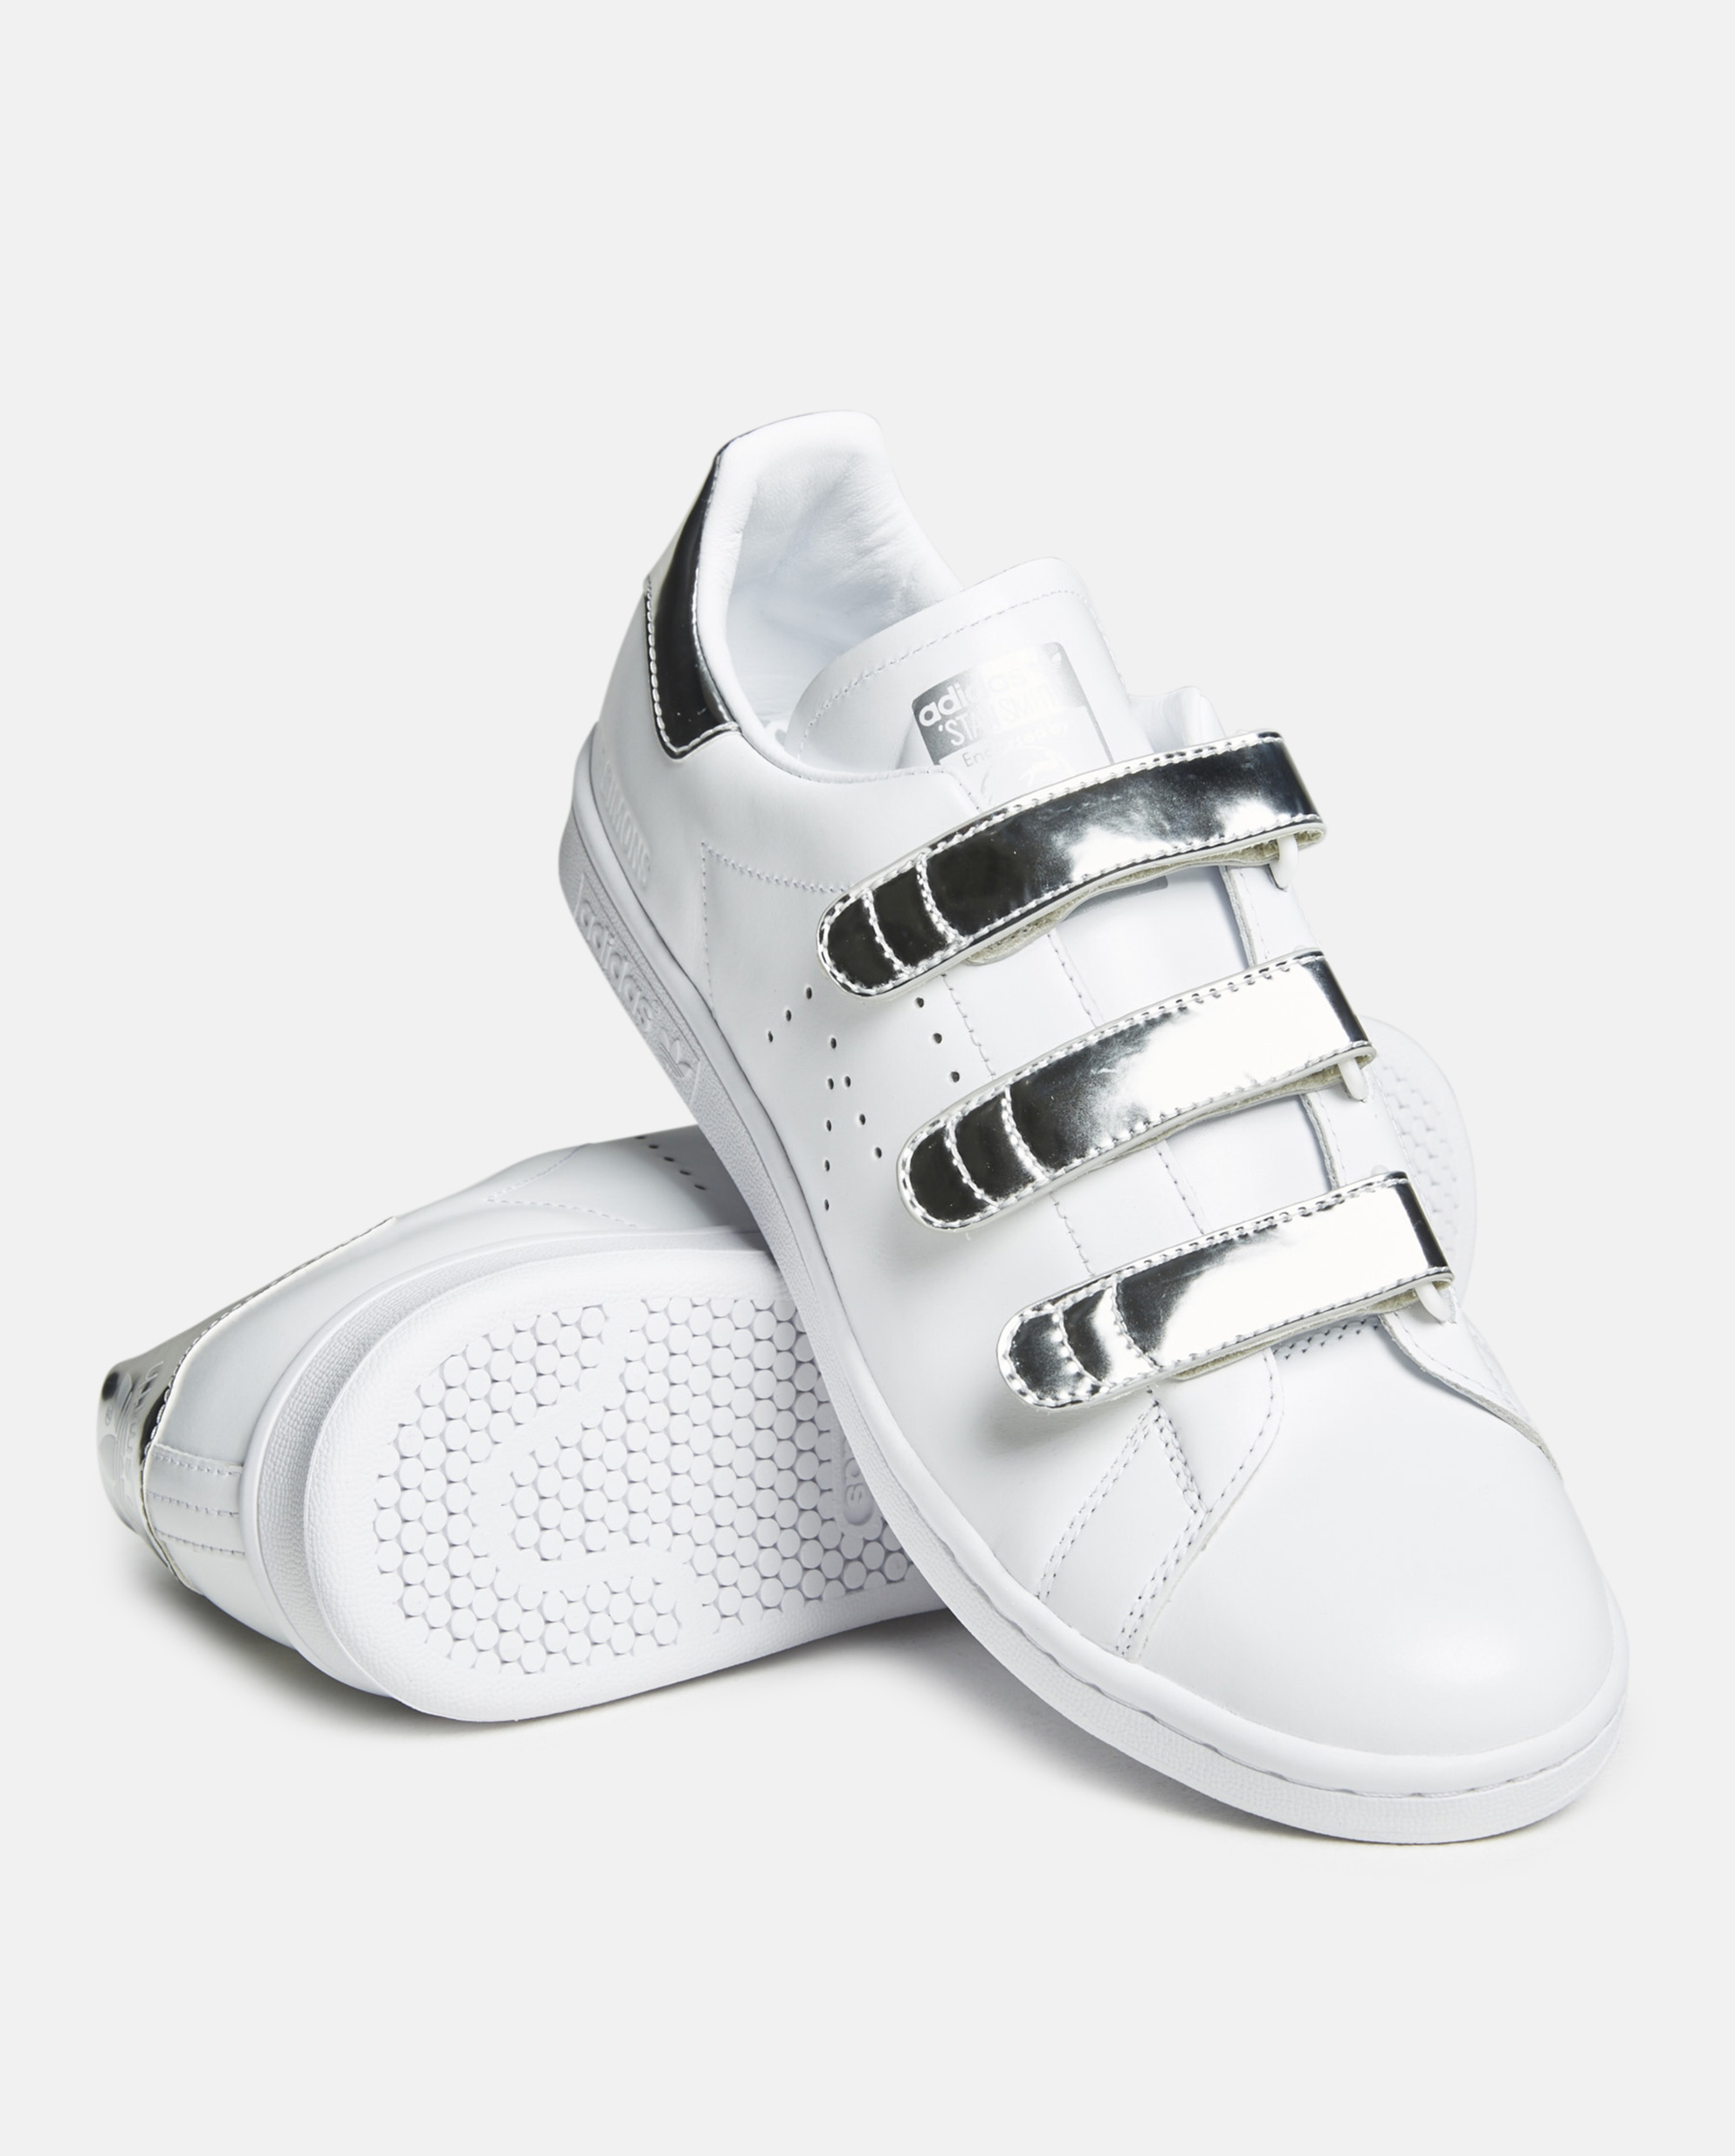 Broek Passend Leugen adidas By Raf Simons Raf X Stan Smith Cf Leather Trainers in Metallic for  Men | Lyst